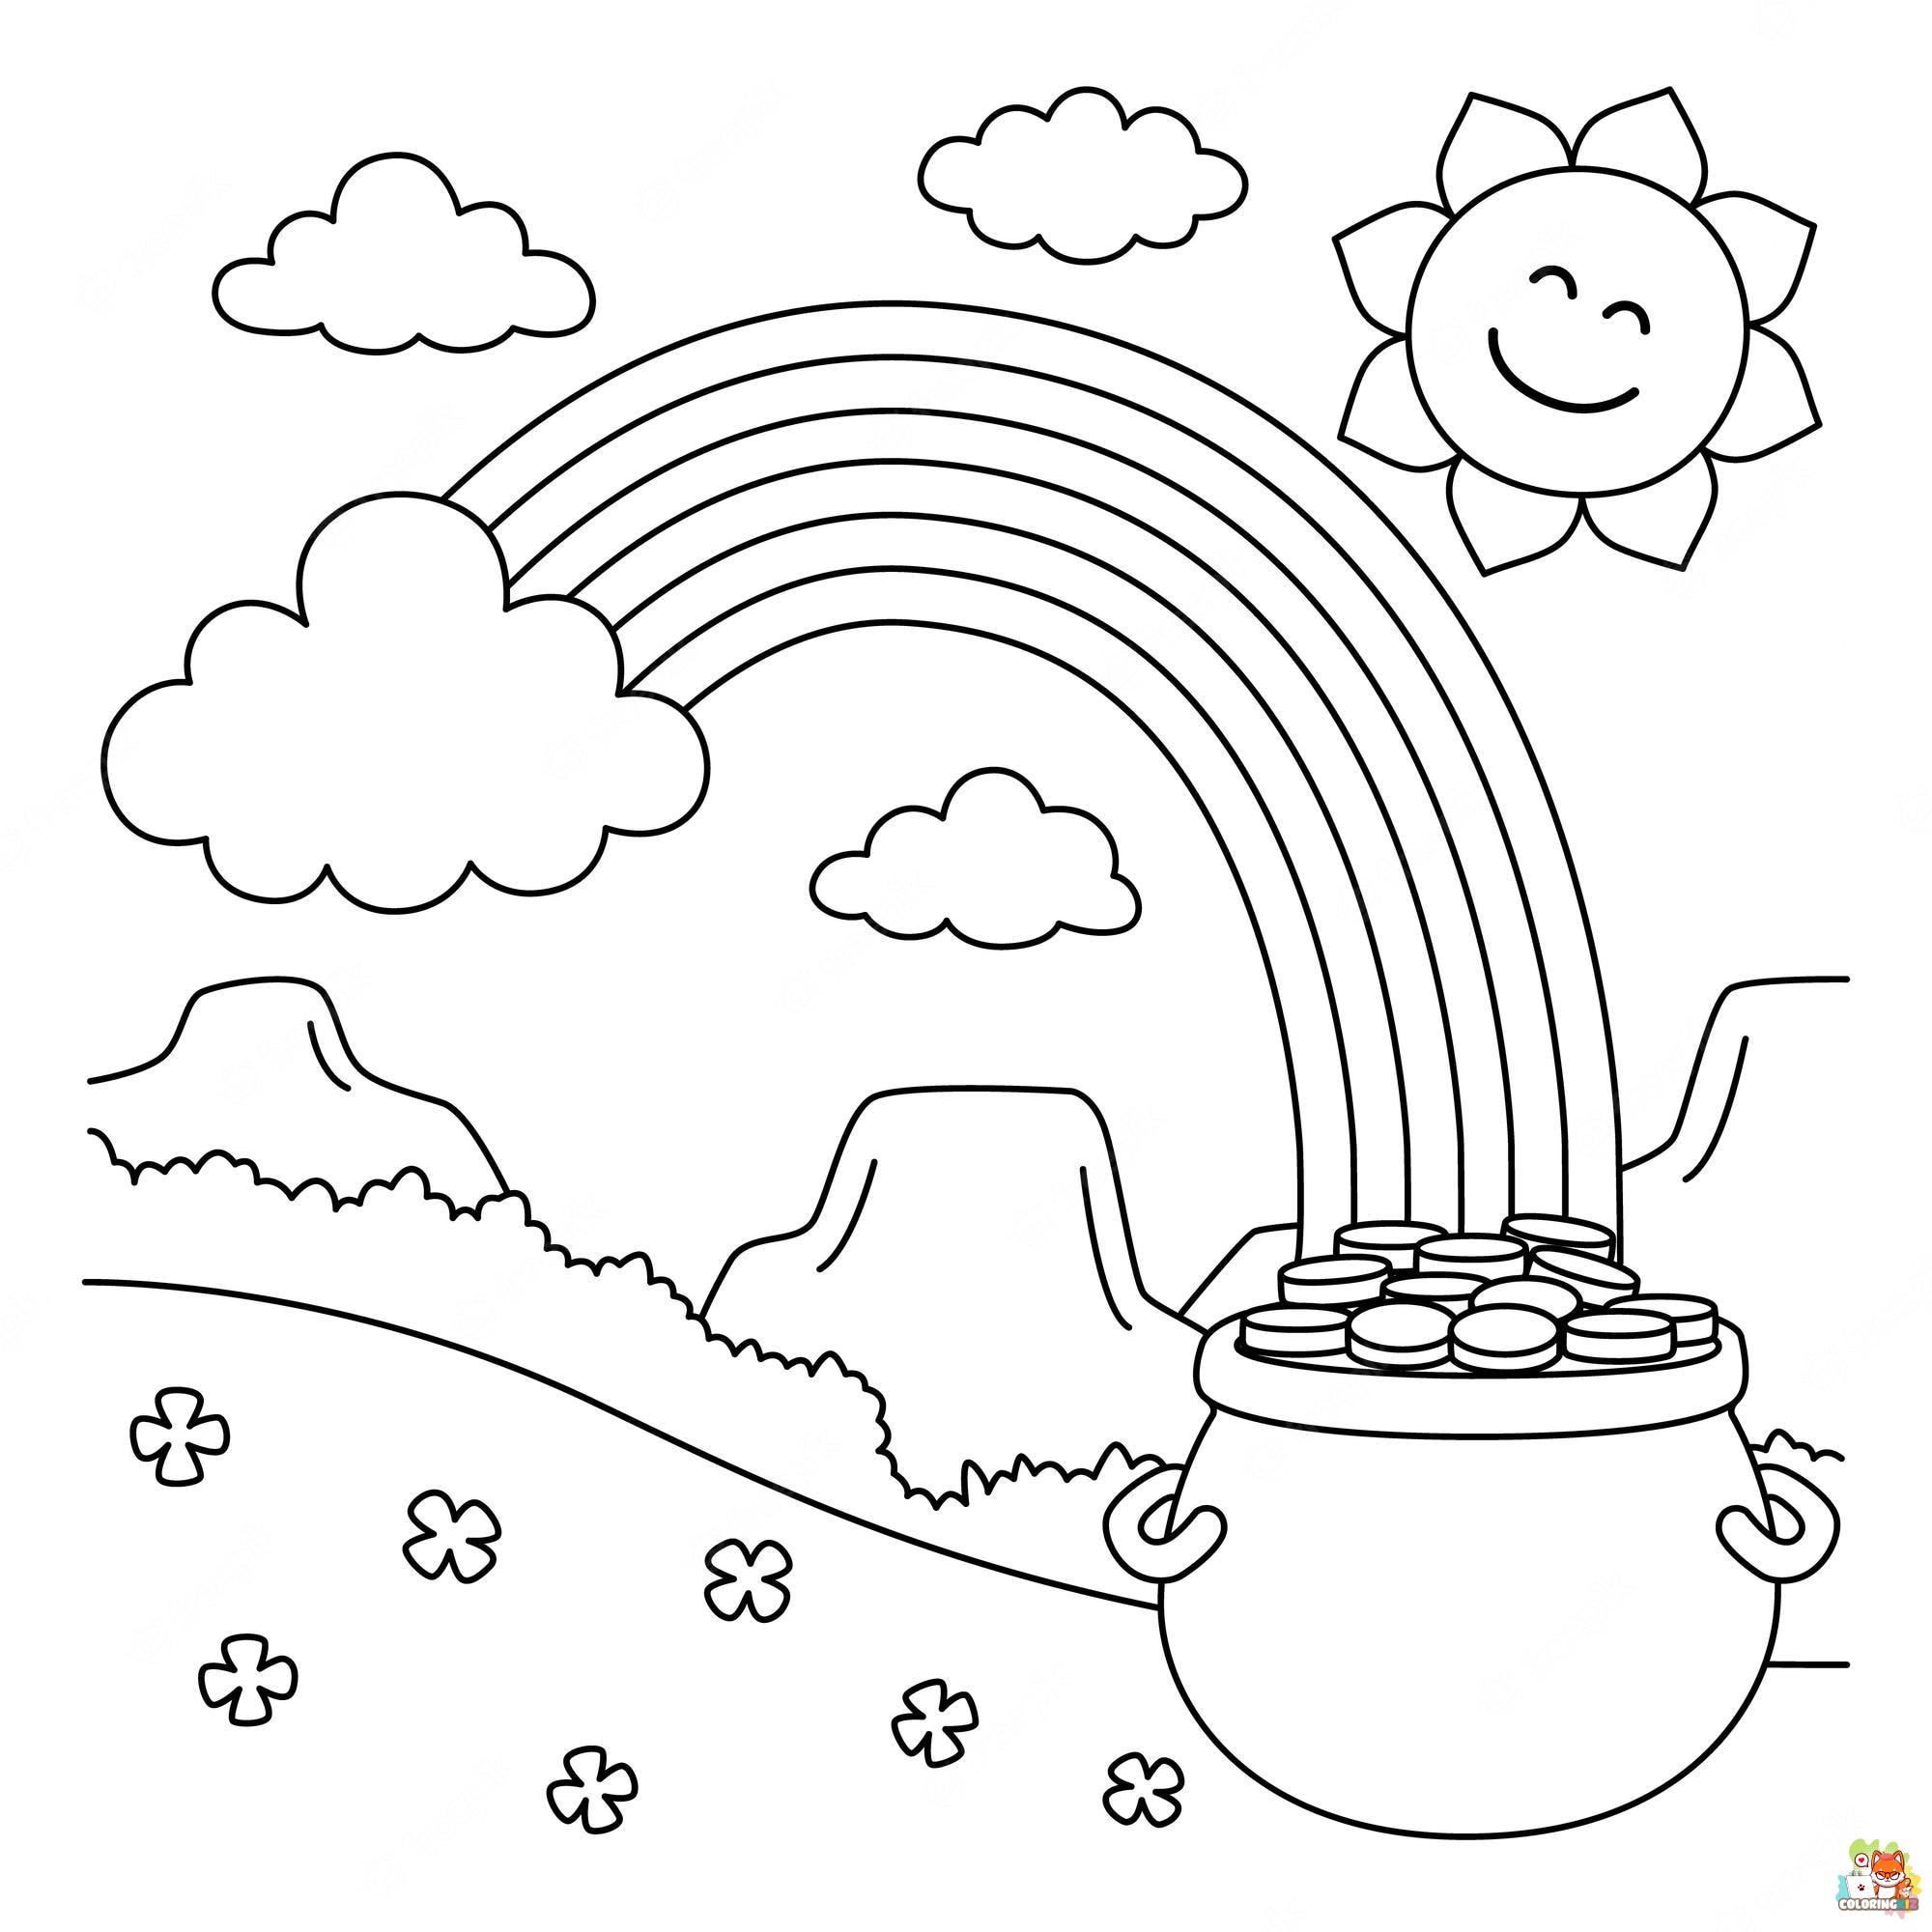 Rainbow Coloring Pages 7